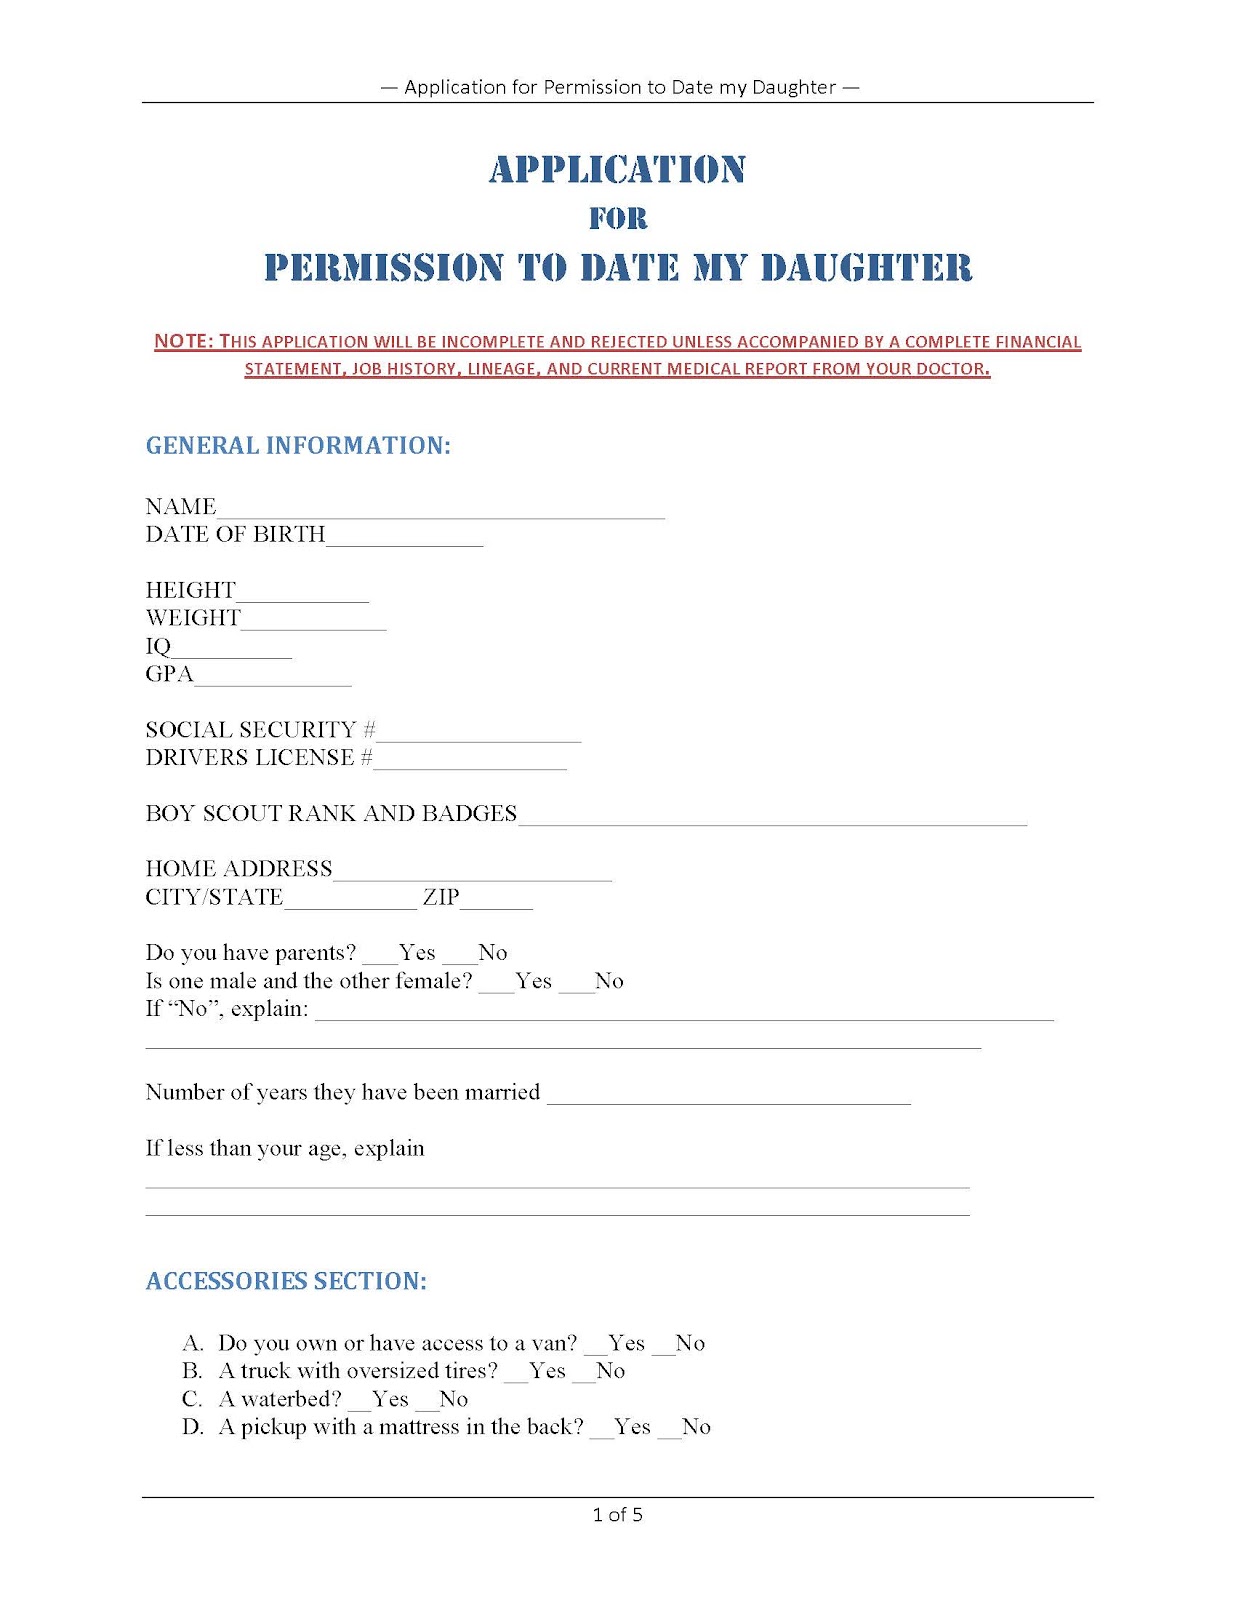 Application for permission to date my daughter Fun_topicz